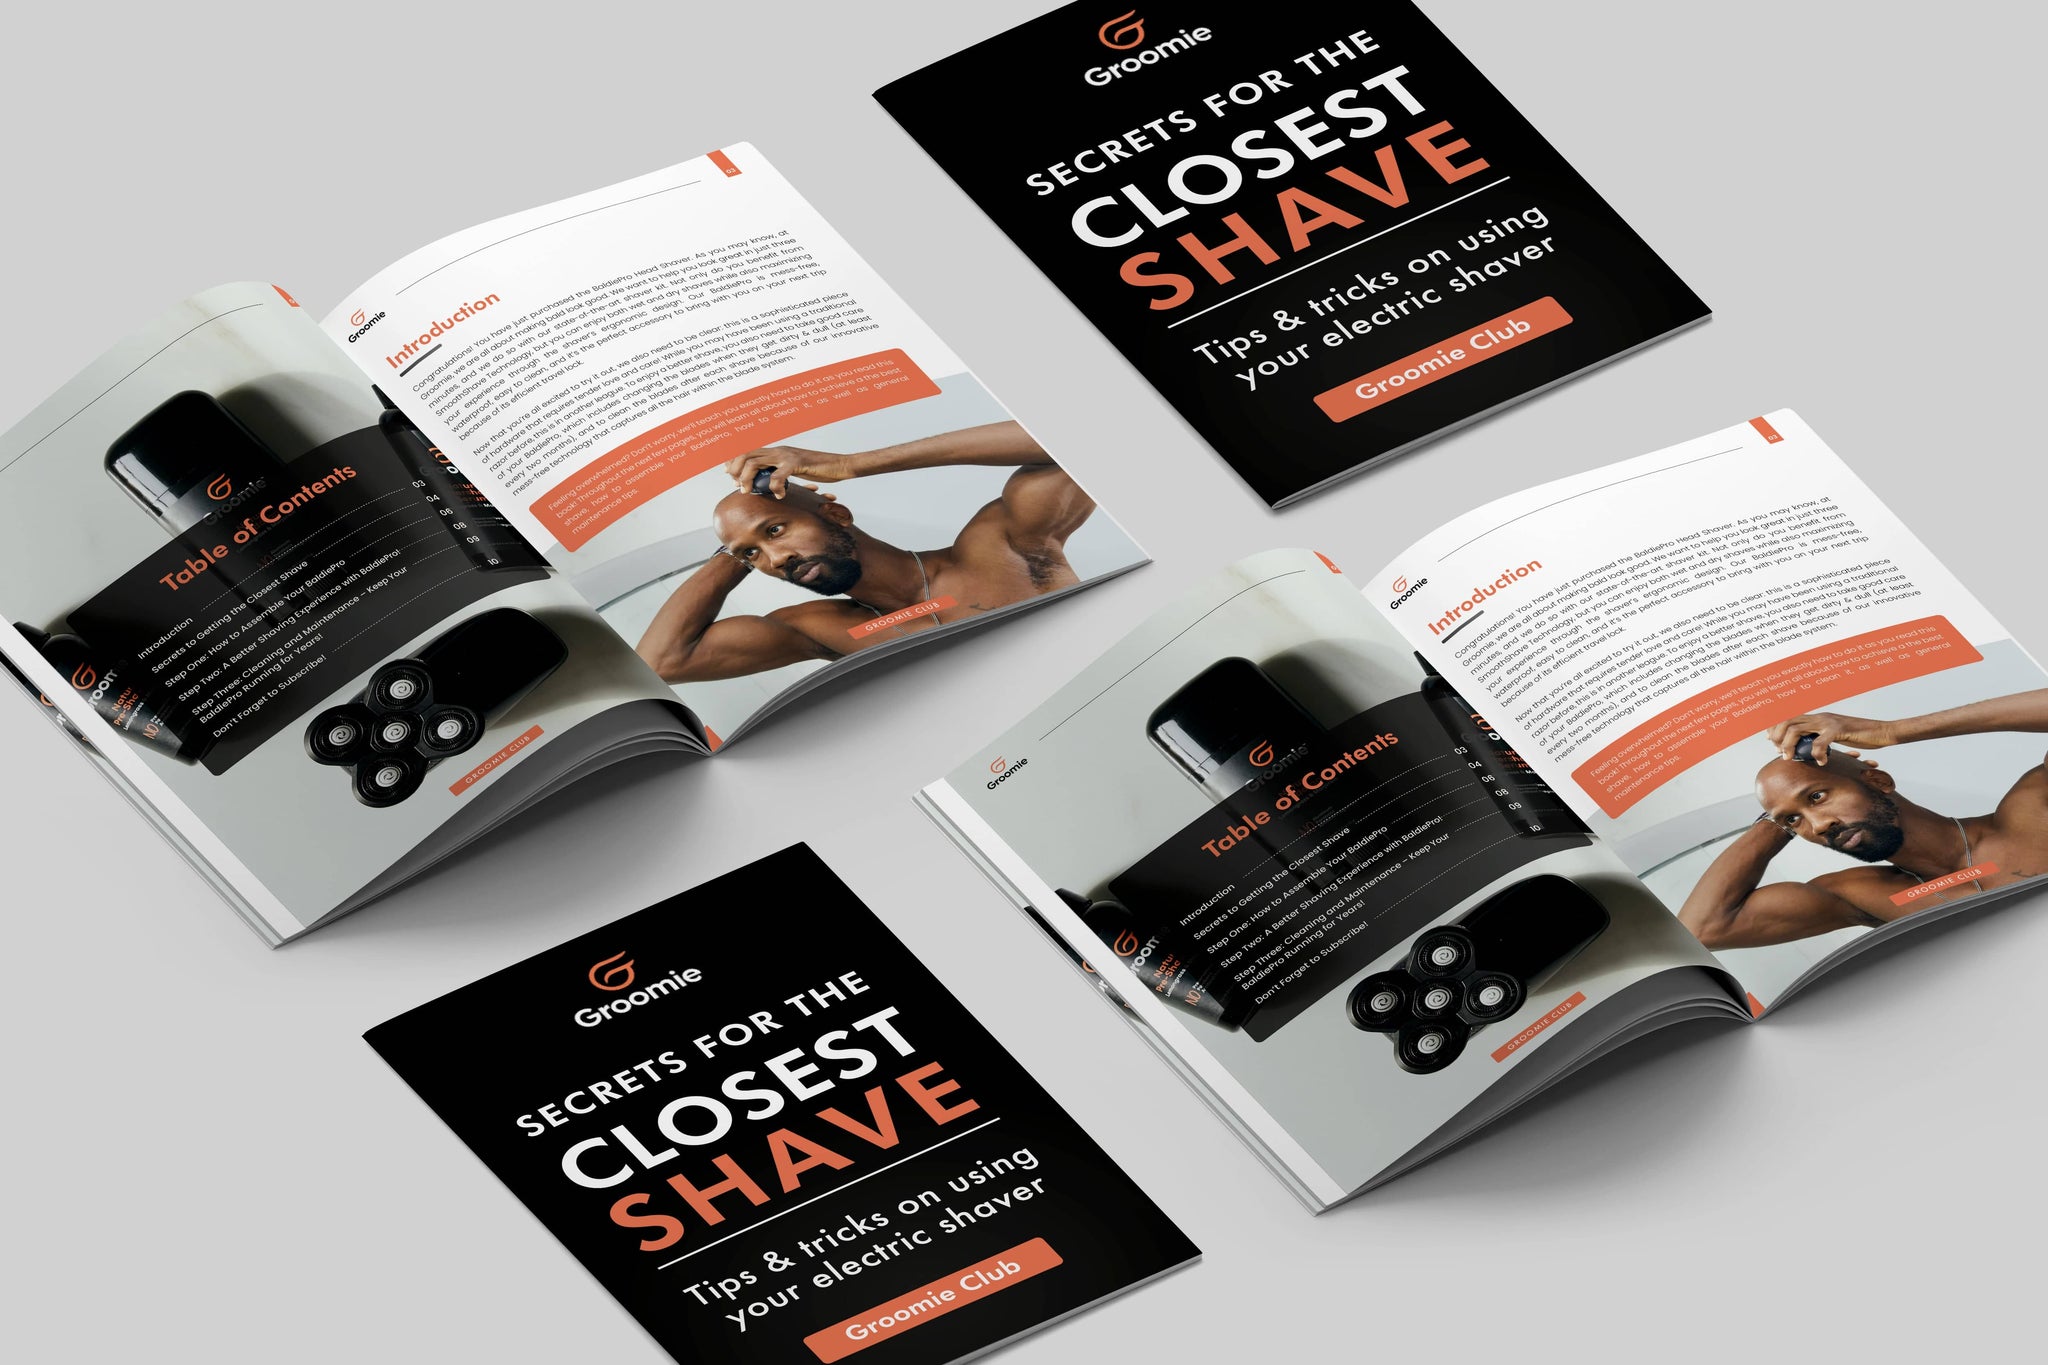 Secrets For The Closest Shave (eBook)